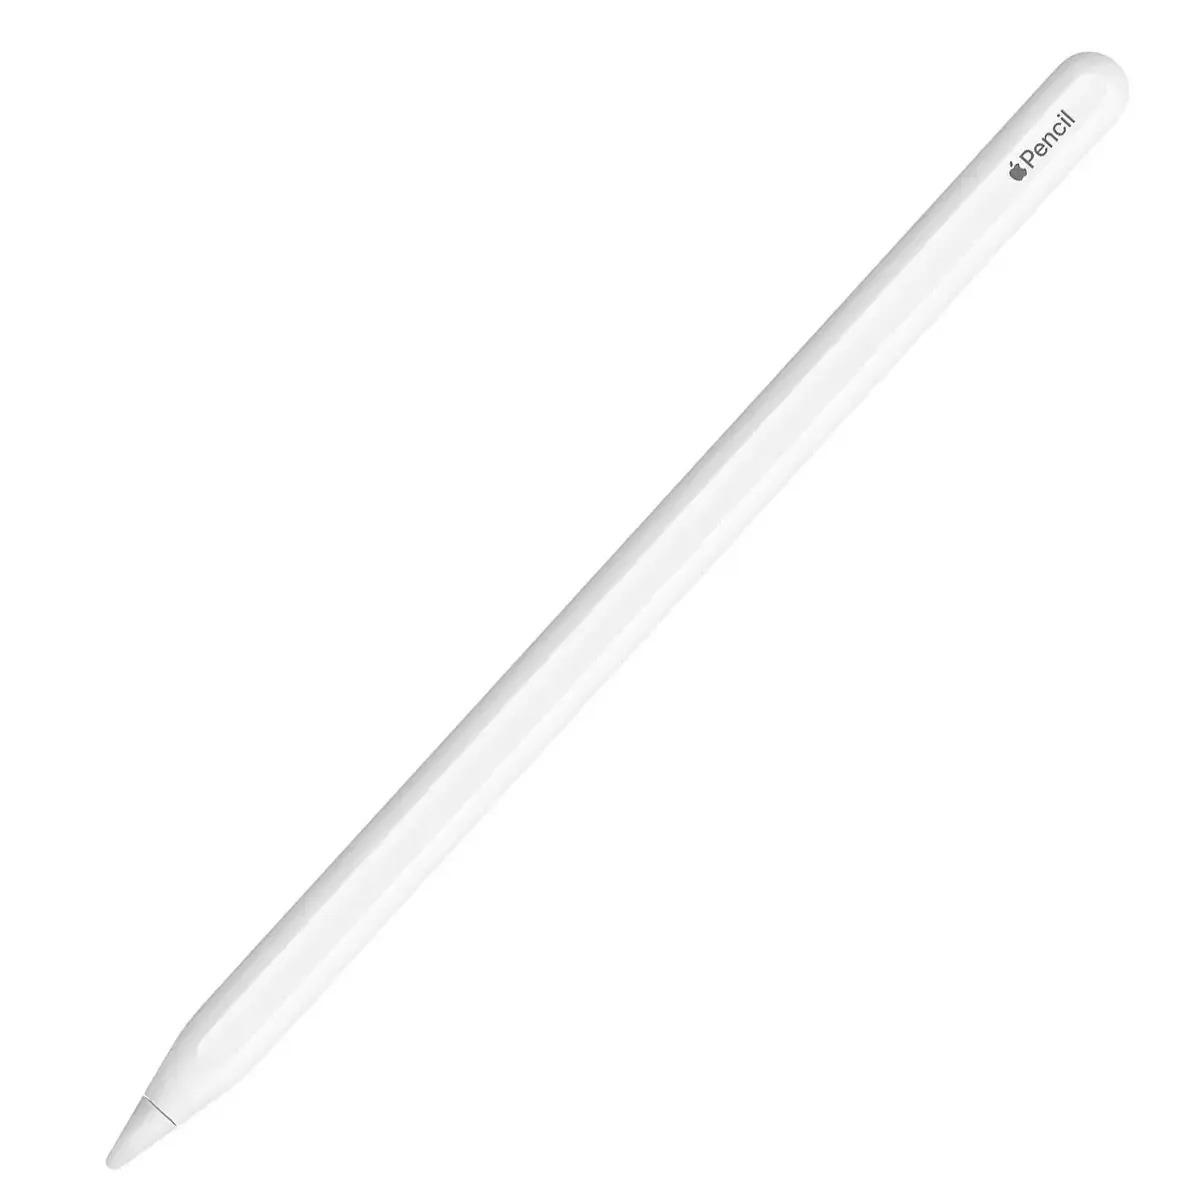 Apple Pencil New USB-C Version for $71.10 Shipped